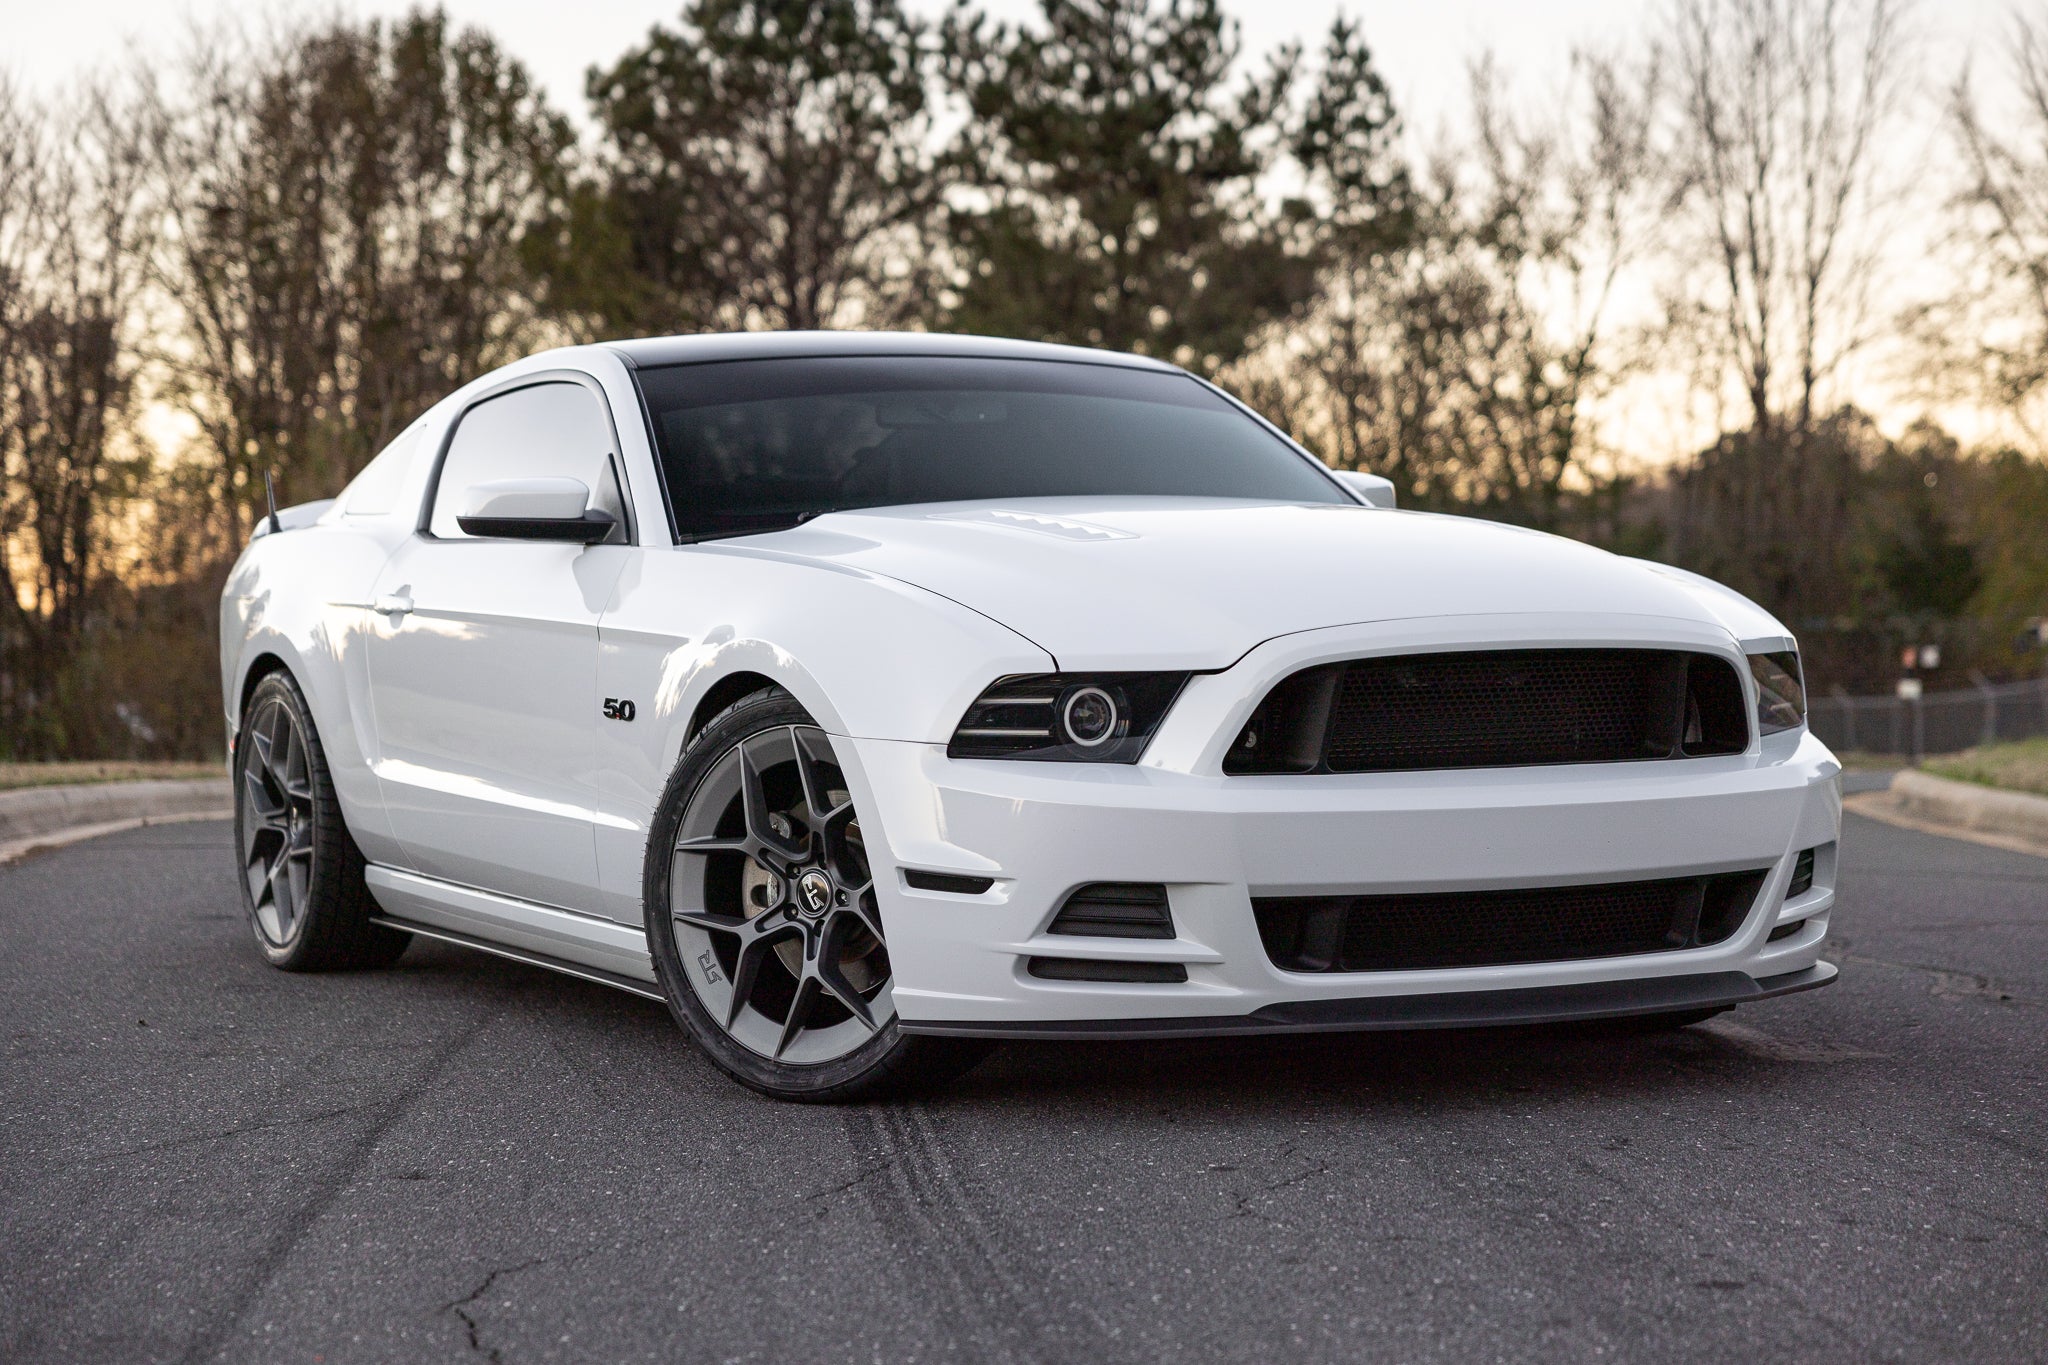 A white Mustang GT with RTR Upper and Lower Grilles parked on a road. Modern aggressive styling inspired by Mustang RTR, designed for 2013-2014 models. Enhances airflow and engine cooling.